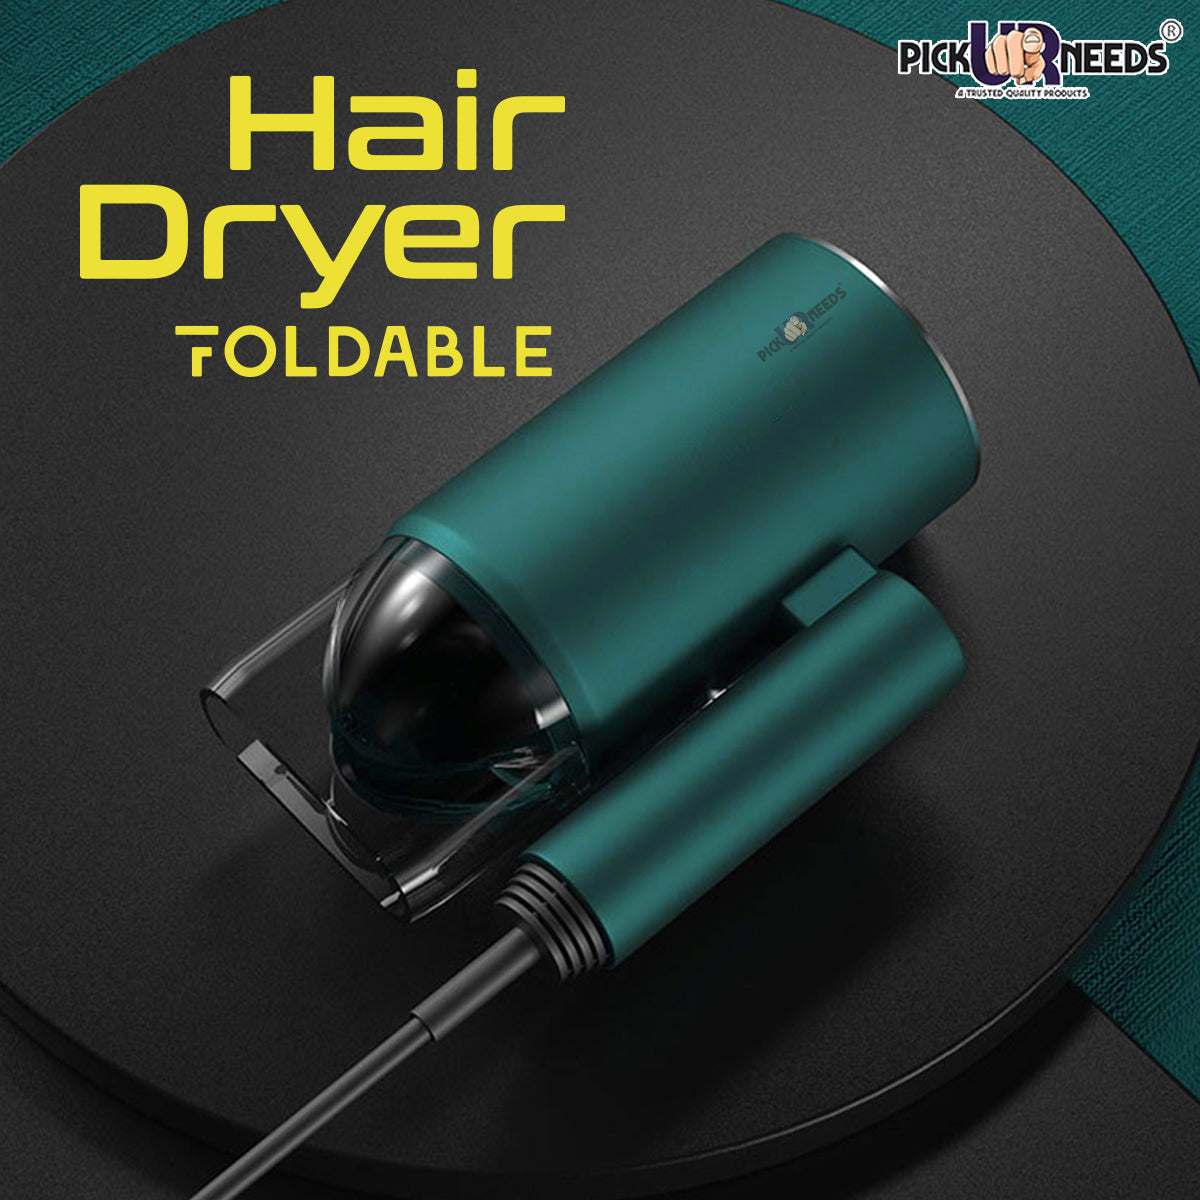 Pick Ur Needs Professional Foldable Stylish Hot And Cold Hair Dryer With Over Heat Protection For Men & Women